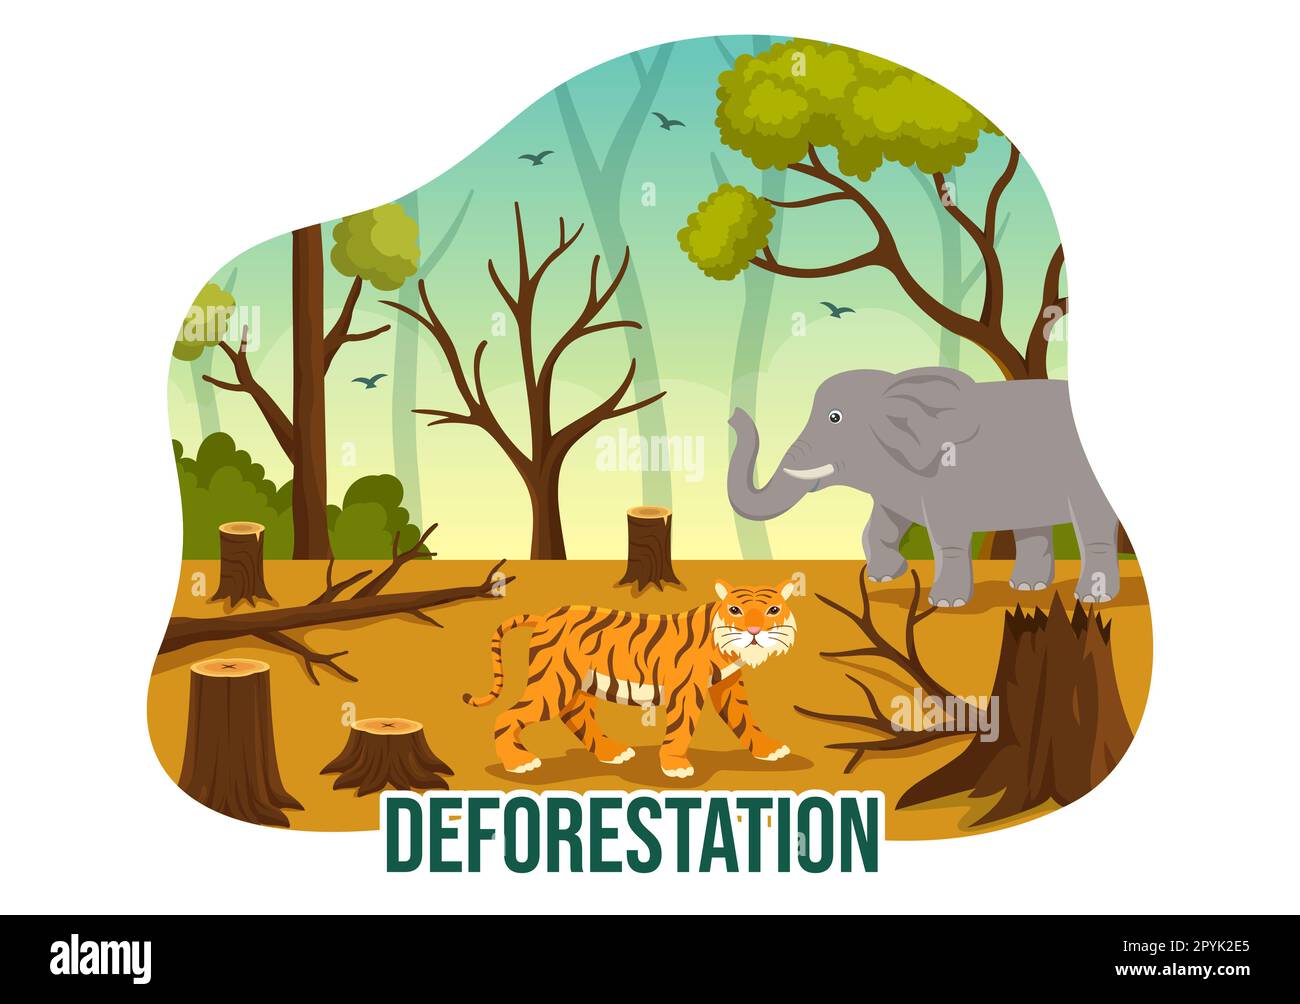 Deforestation Illustration with Tree in the Felled Forest and Burning Into Pollution Causing the Extinction of Animals in Cartoon Hand Drawn Templates Stock Photo